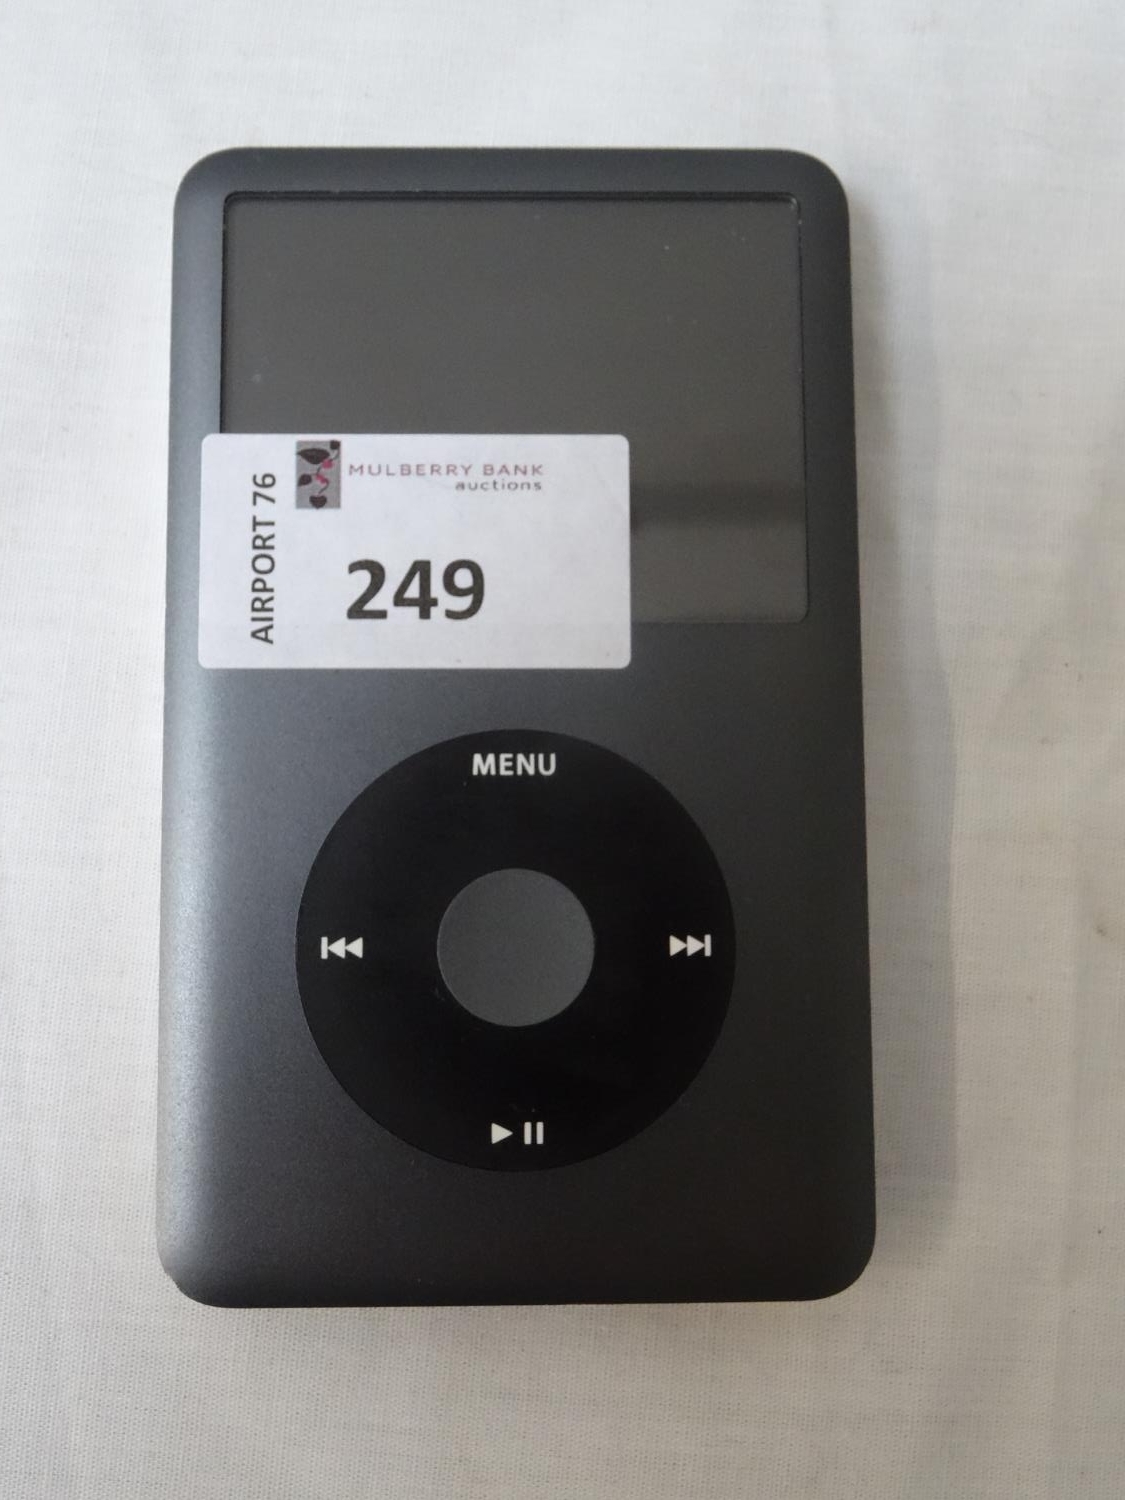 APPLE IPOD CLASSIC 160GB - MODEL A1238 serial number